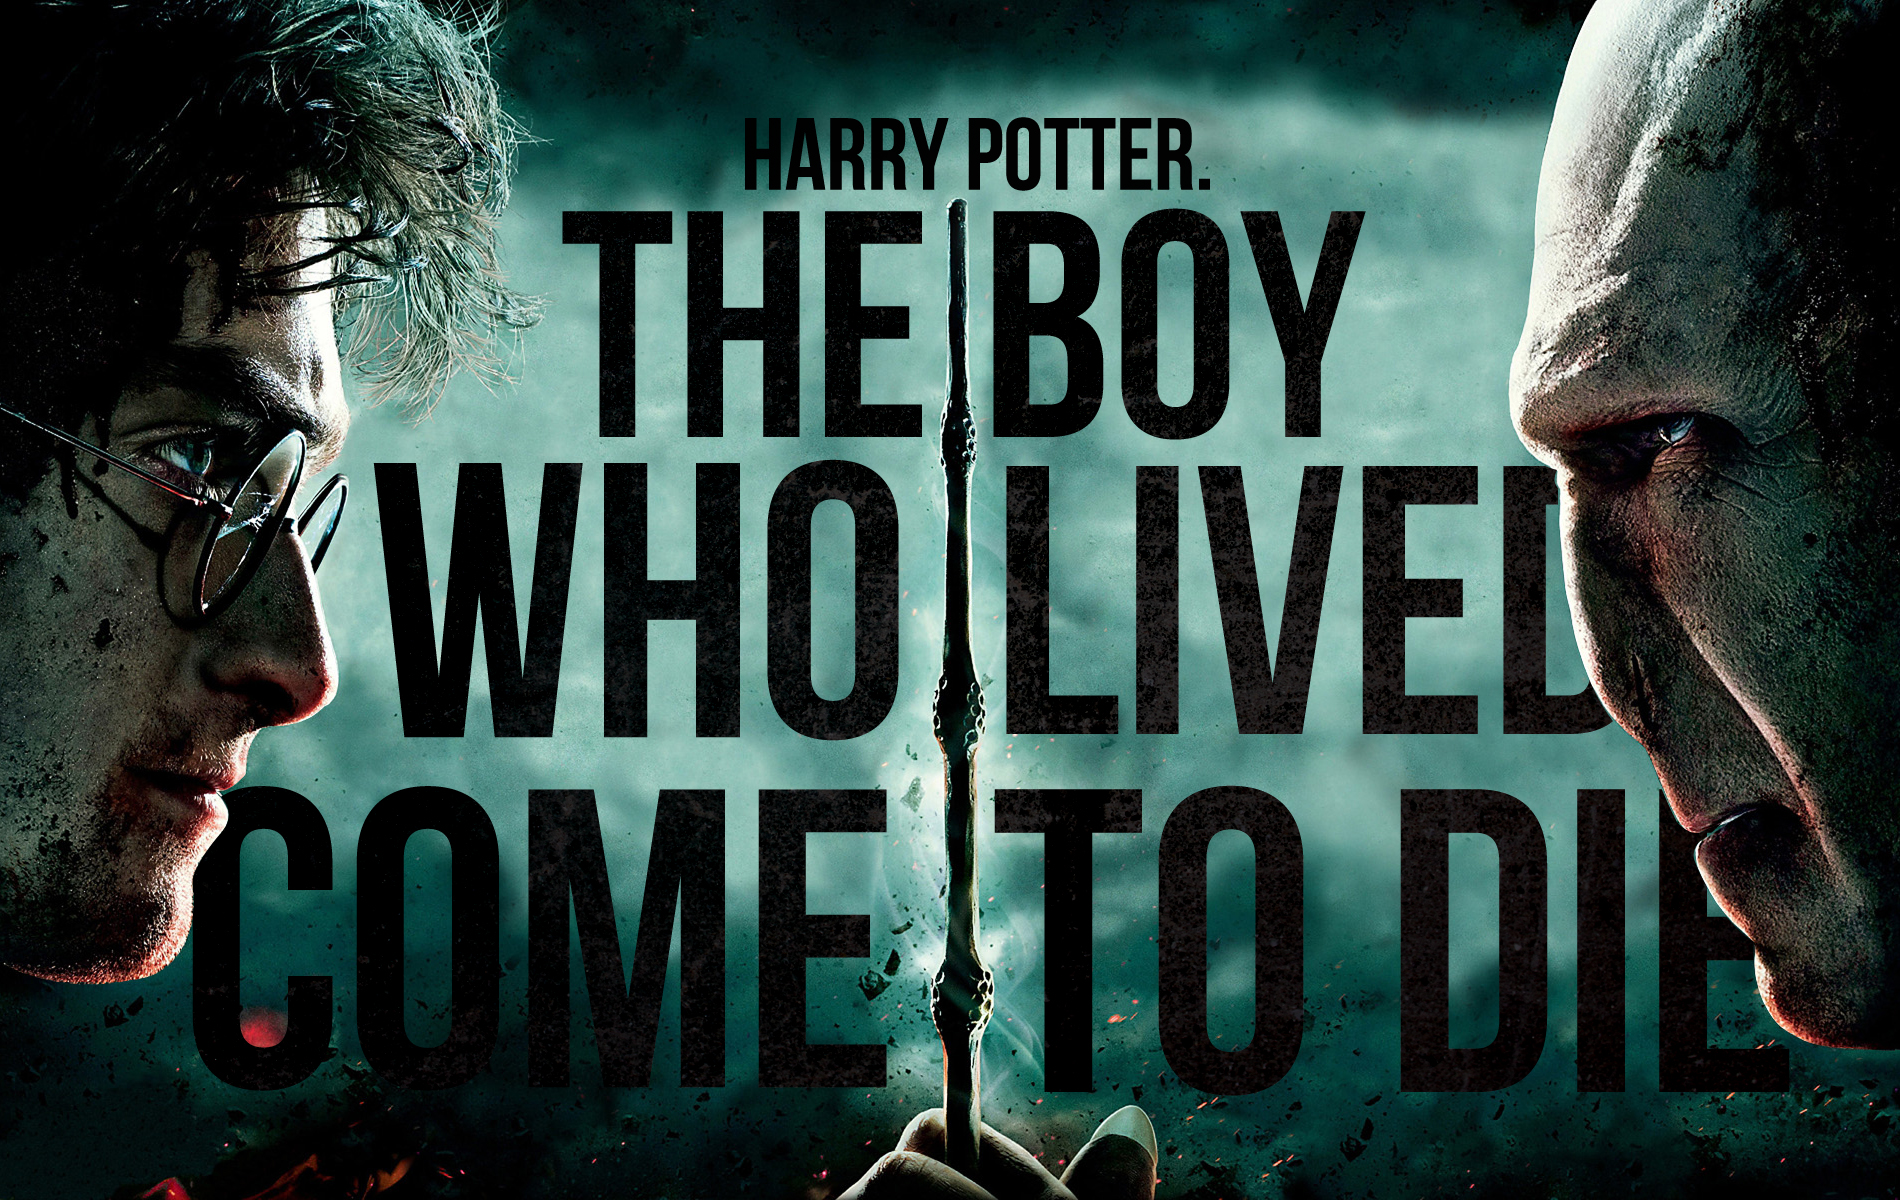 Harry Potter and the Deathly Hallows: Part 2 Wallpaper